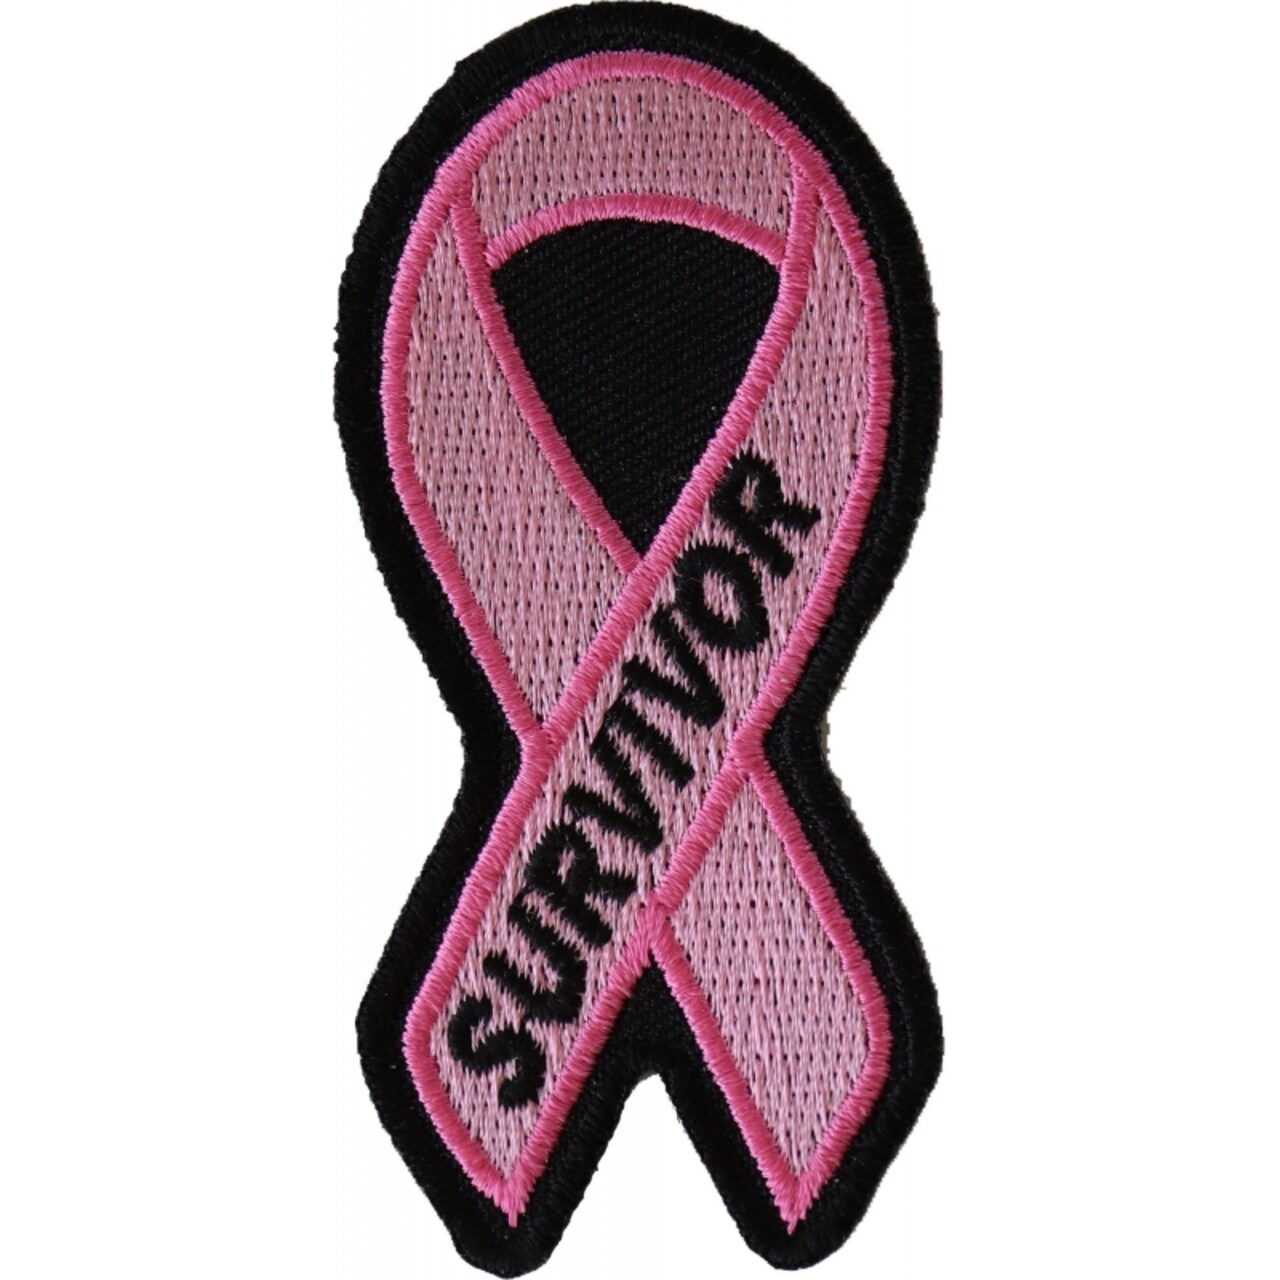 Patch, Embroidered Patch (Iron-On or Sew-On), Breast Cancer